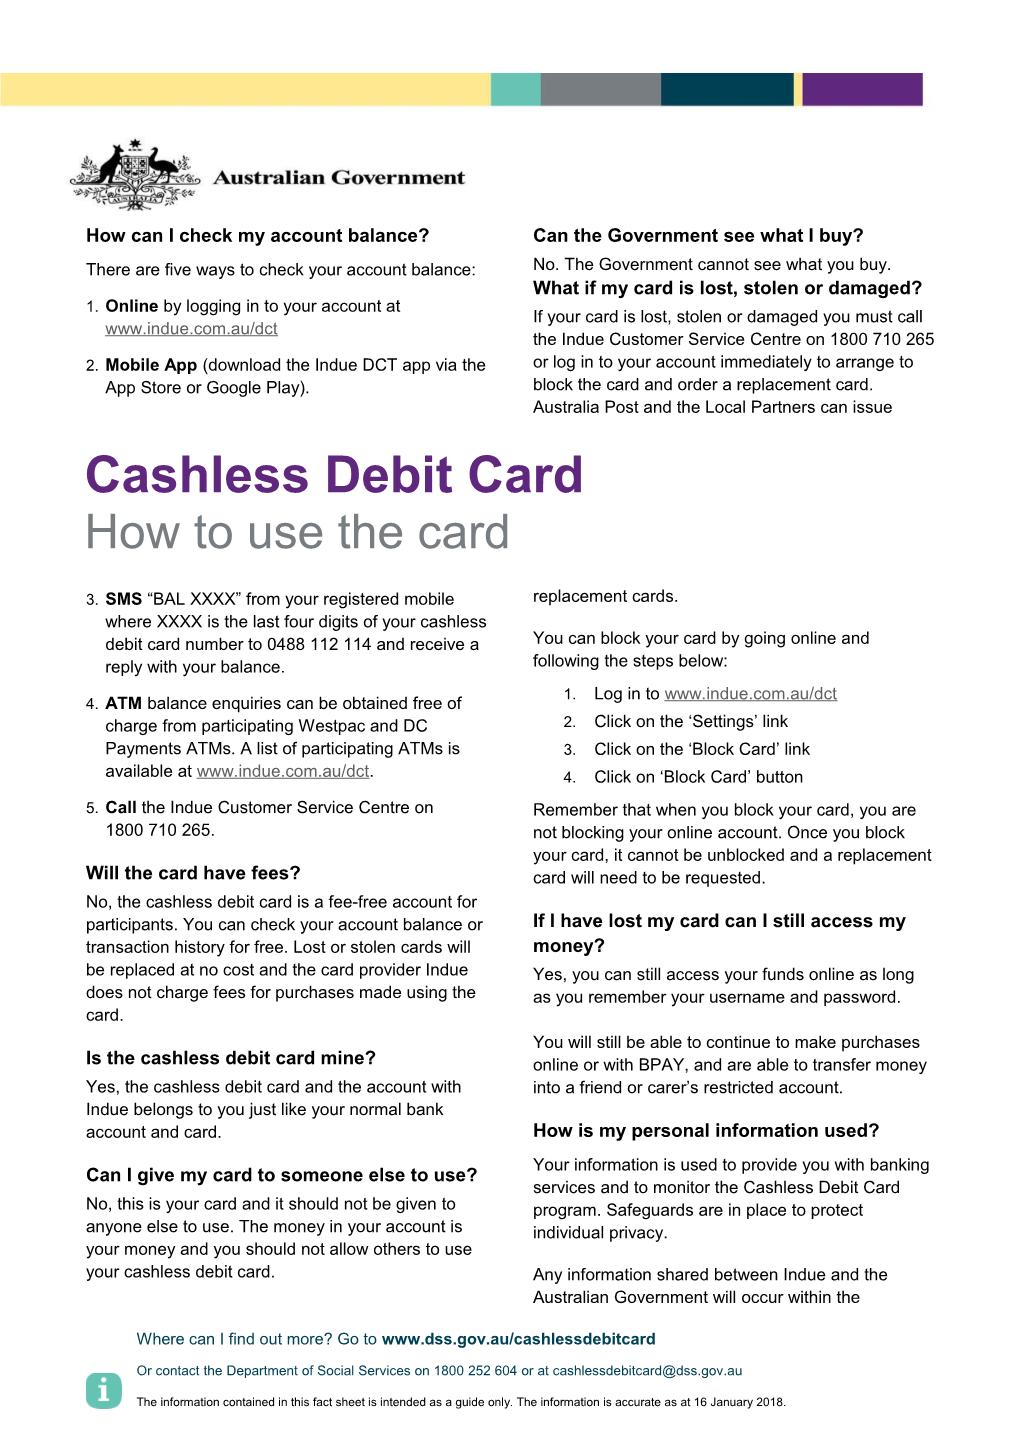 Cashless Debit Card More Information About How to Use the Card